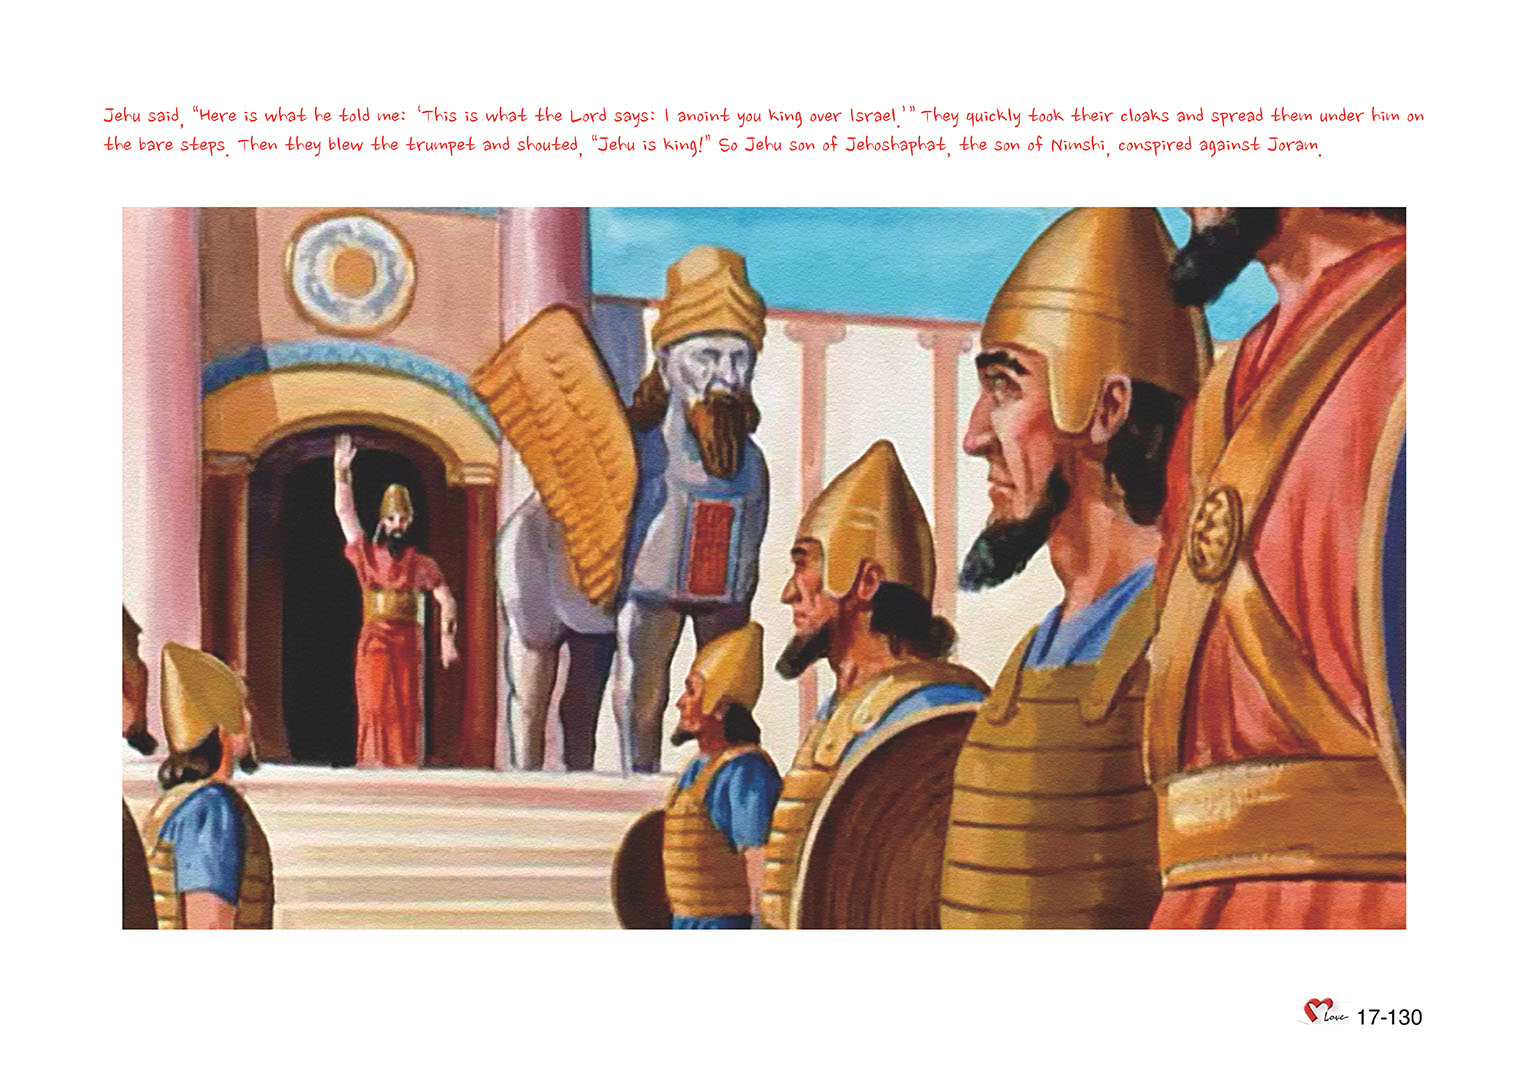 Chapter 17 - Lesson 55 - North king Ahaziah, Jehoram, and Jehu